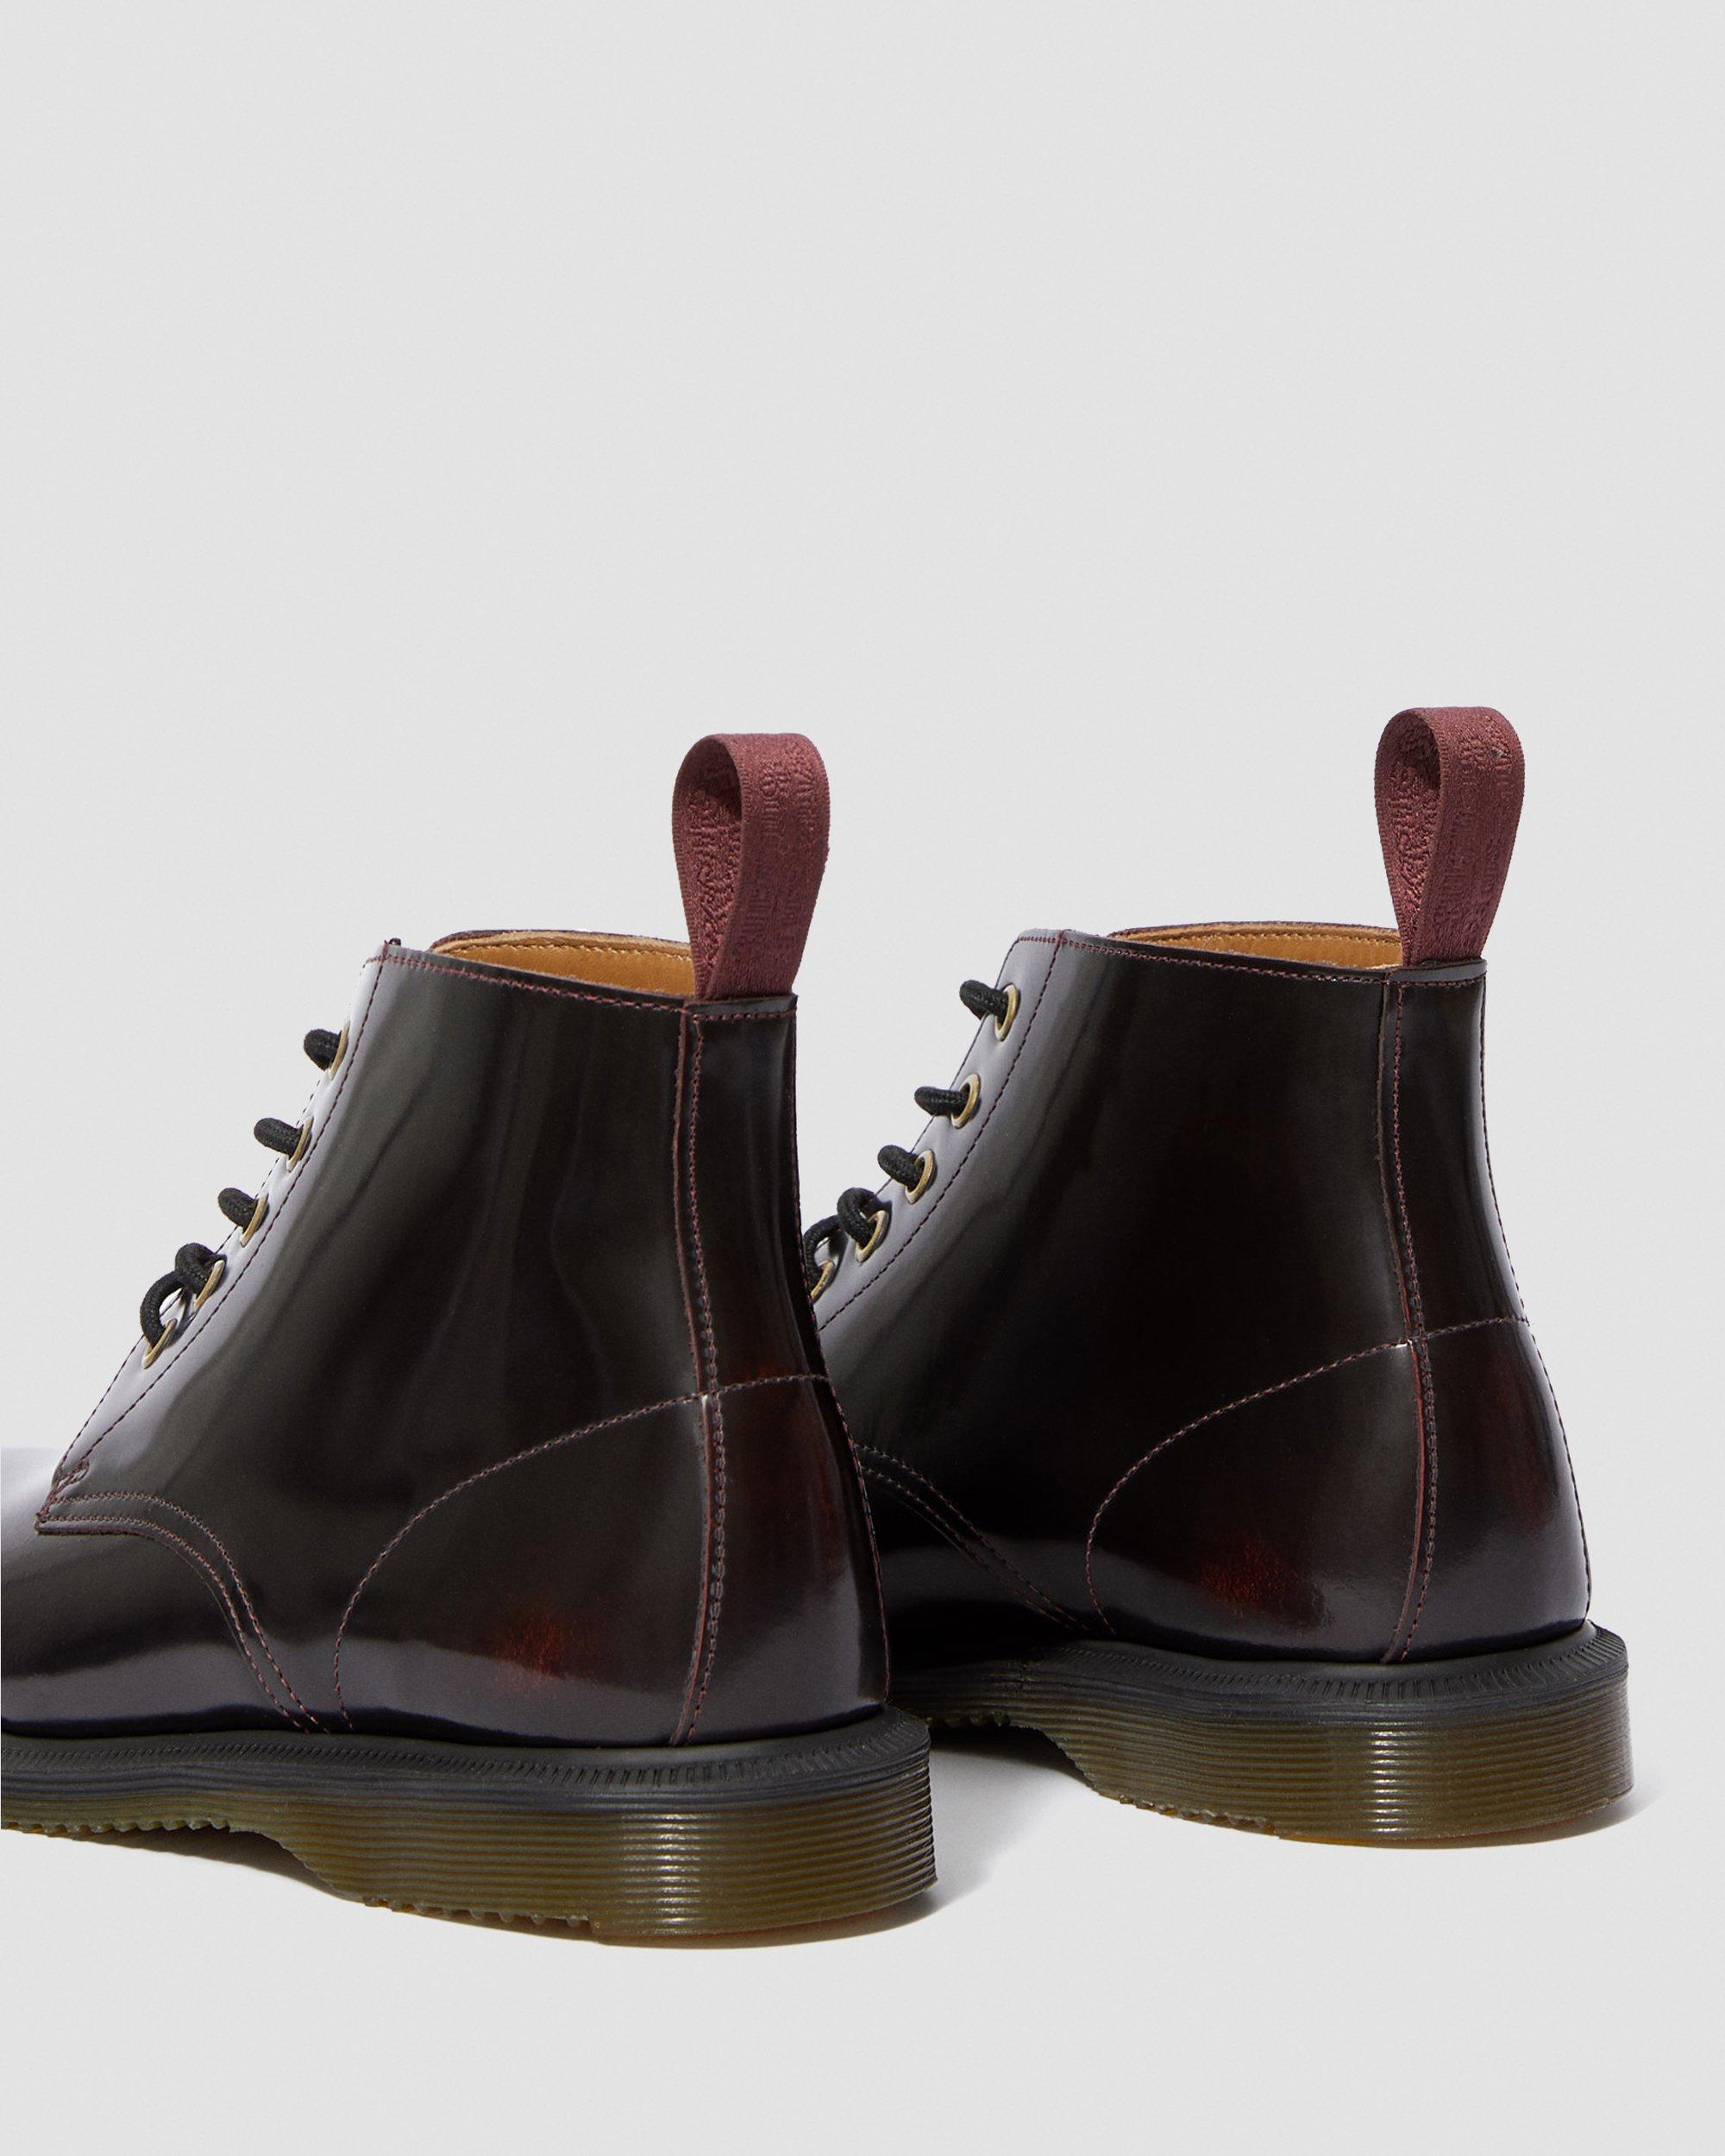 rietje Victor documentaire EMMELINE LEATHER LACE UP ANKLE BOOTS | Dr. Martens